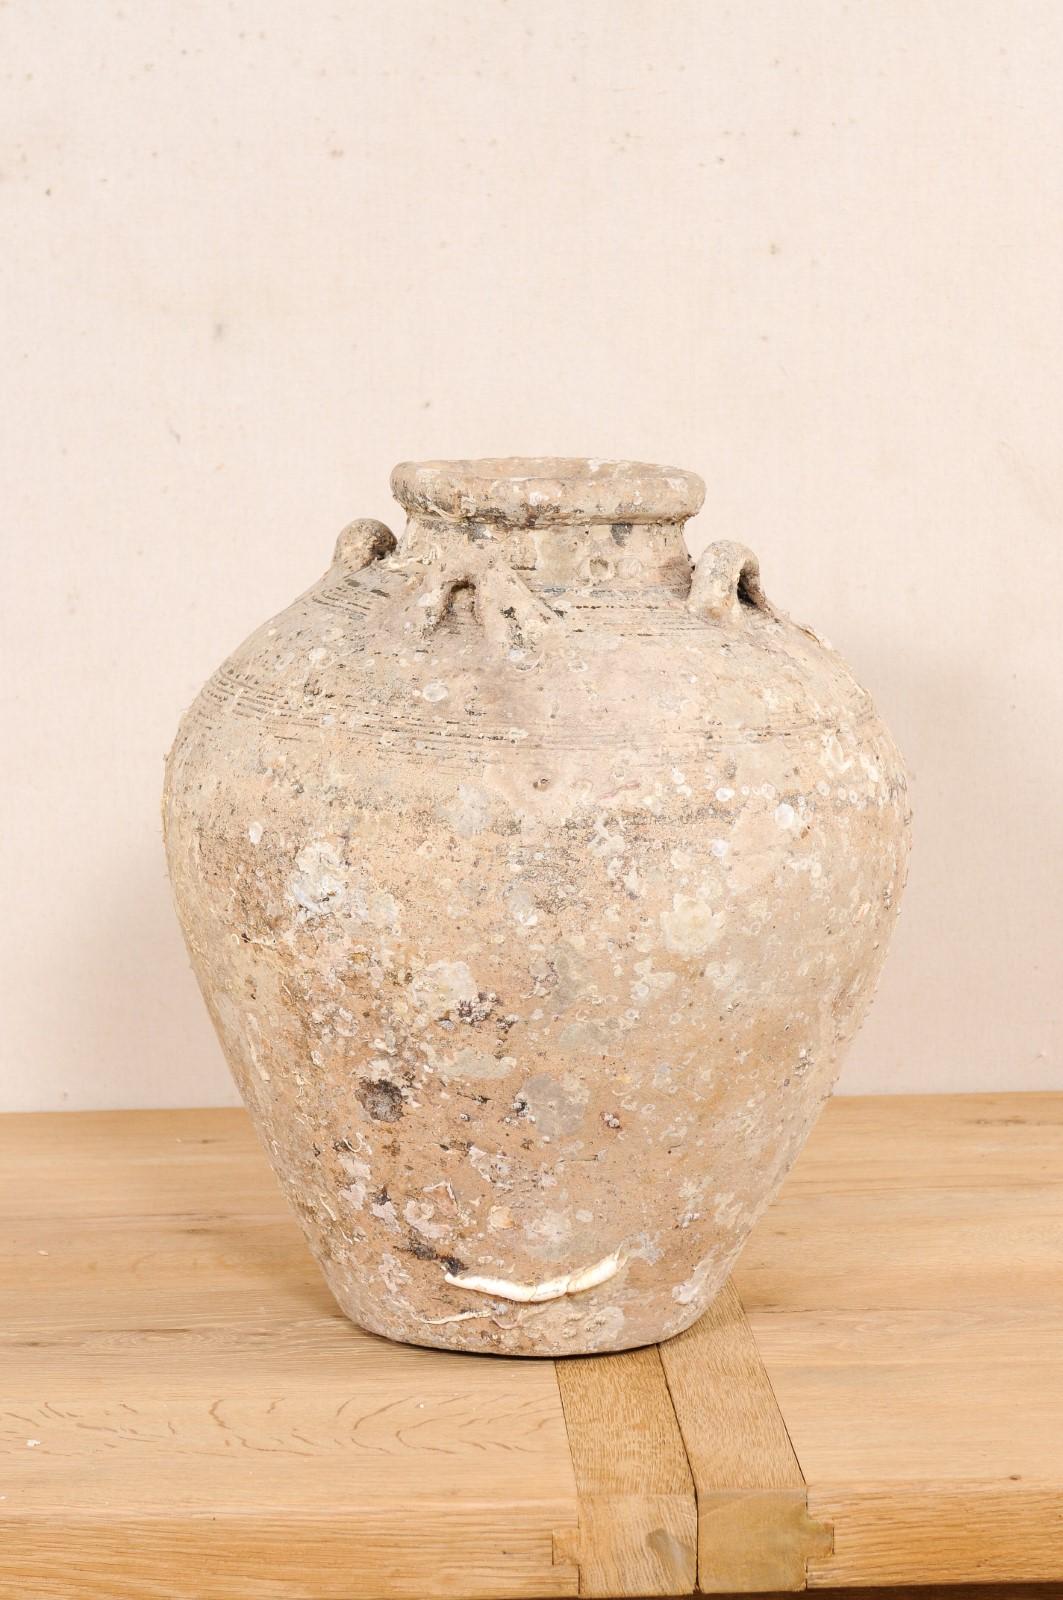 This ceramic vessel from Thailand, circa early to mid 1500's, is an excellent specimen of a salvaged ceramic jar from a shipwreck during in the Ming gap period. This antique jar from Thailand stands just over 20 inches in height and has a rounded